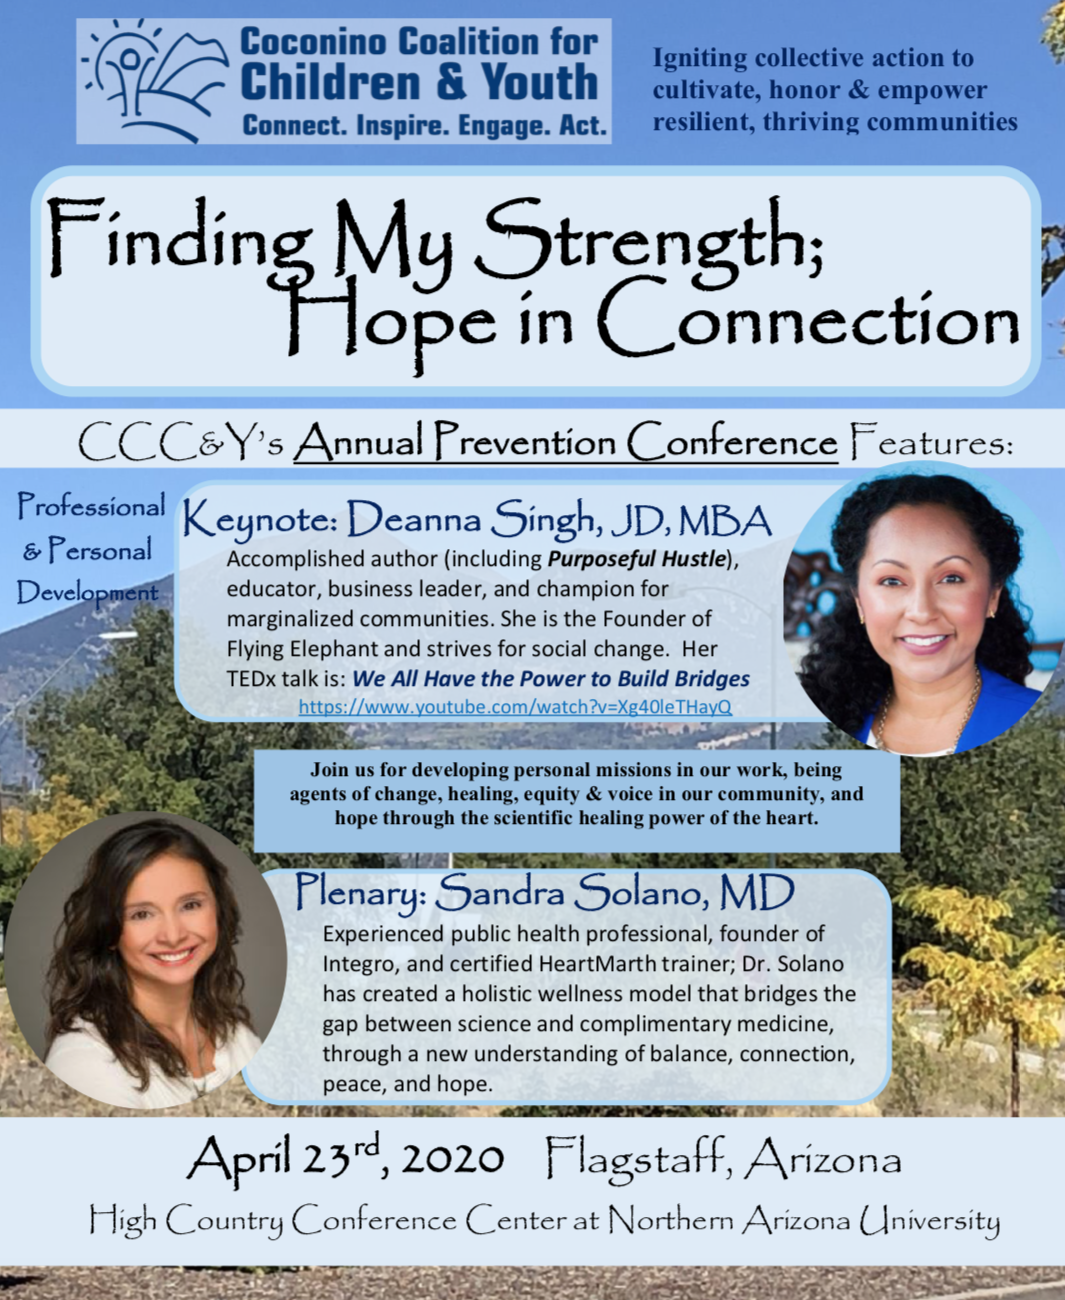 POSTPONED: 2020 Annual CCC&Y Prevention Conference : Children & Youth